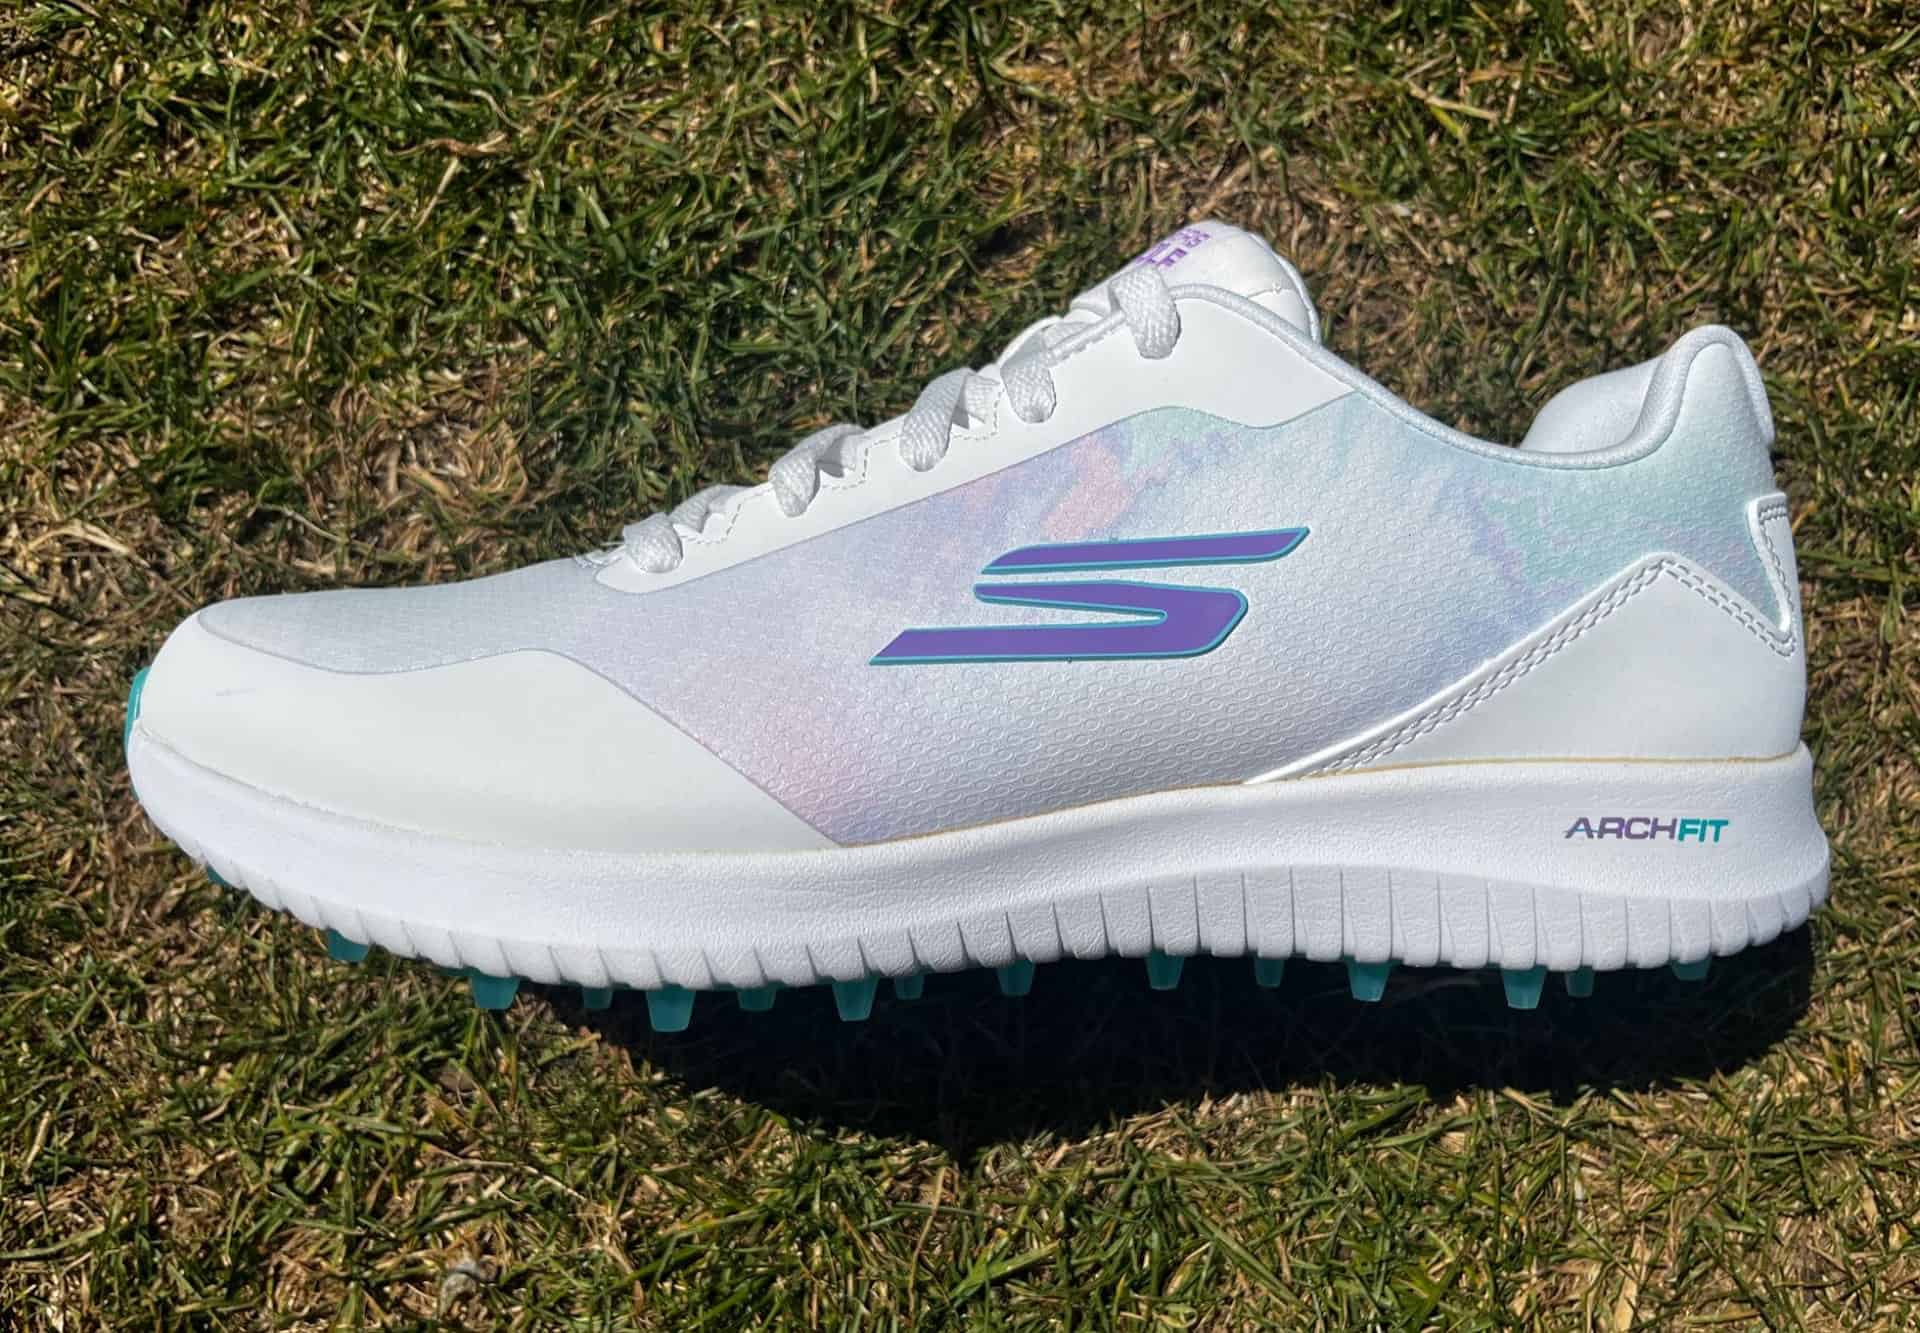 Sketchers Arch Fit Go Golf Max 2 golf shoes review